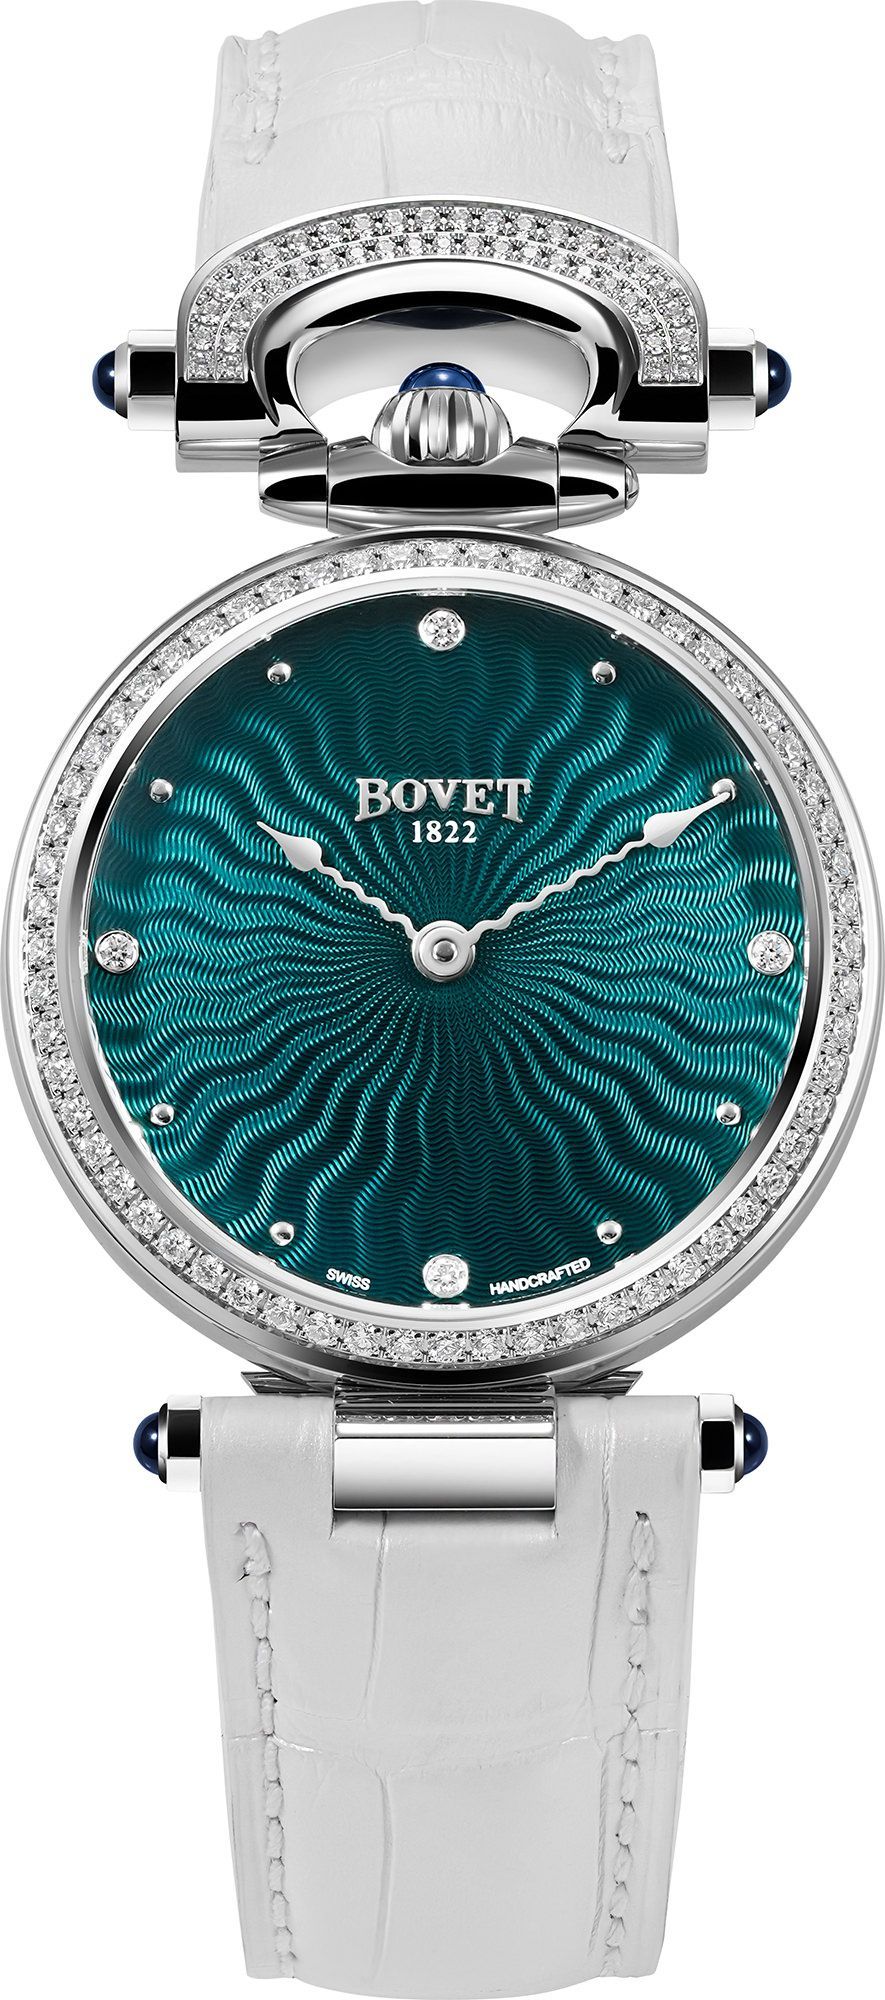 Bovet Fleurier Miss Audrey Turquoise Dial 36 mm Automatic Watch For Women - 1